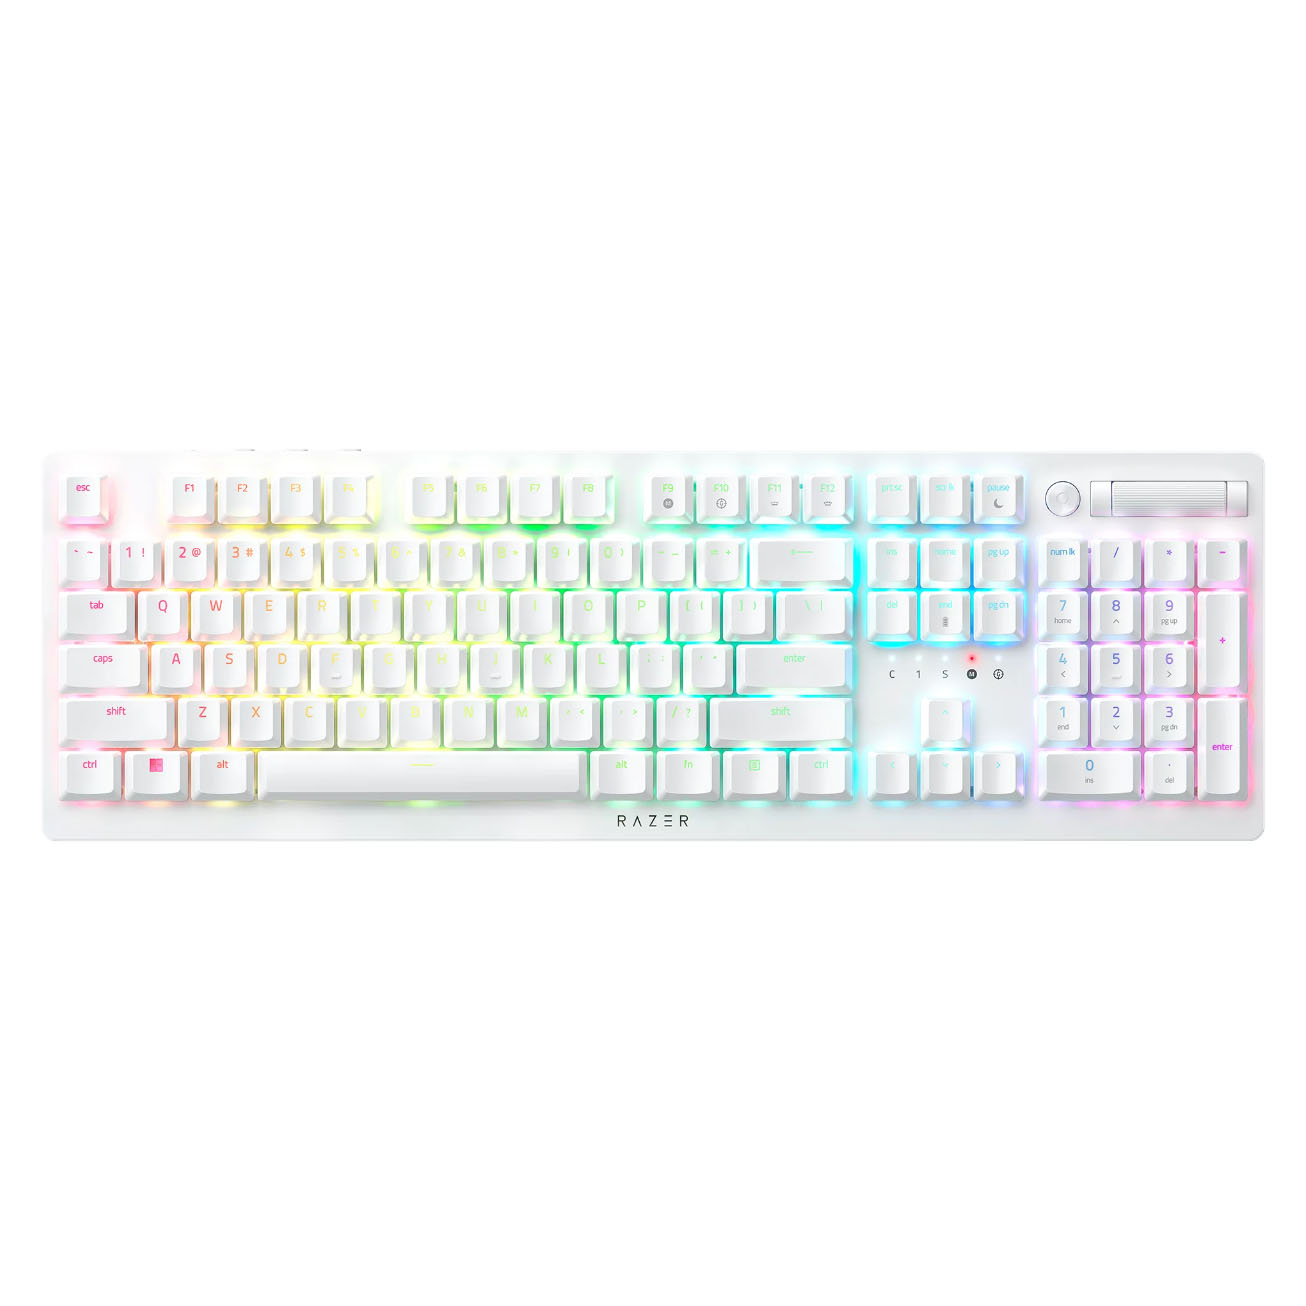 white keyboard with colorful LED backlight